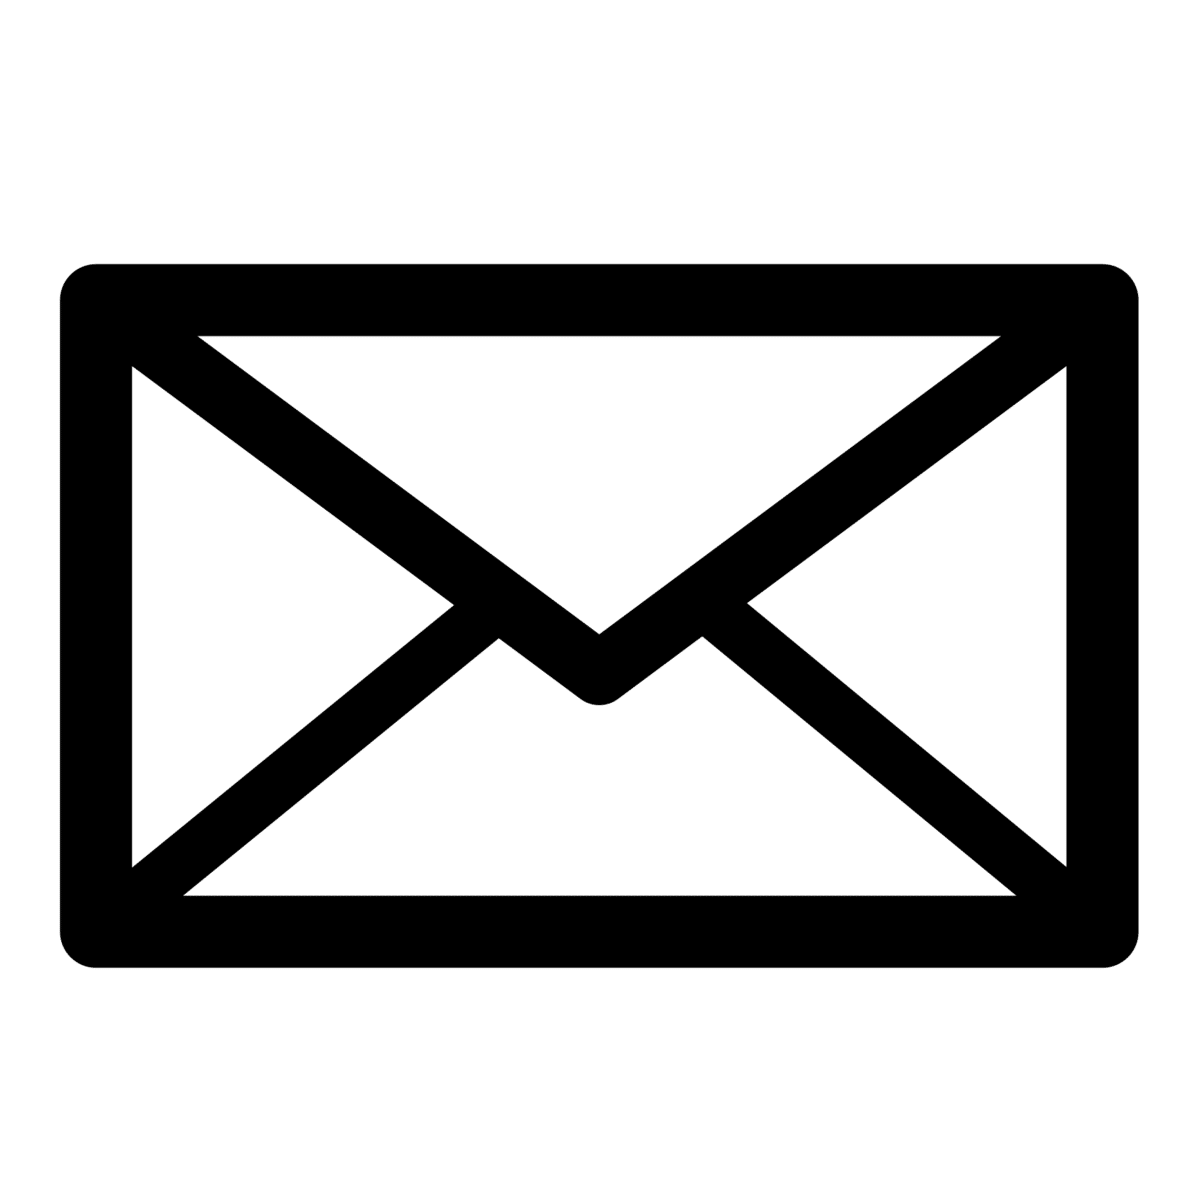 kisspng-computer-icons-email-royalty-free-clip-art-send-email-button-5ac26e62a14045.8717127015226916826605